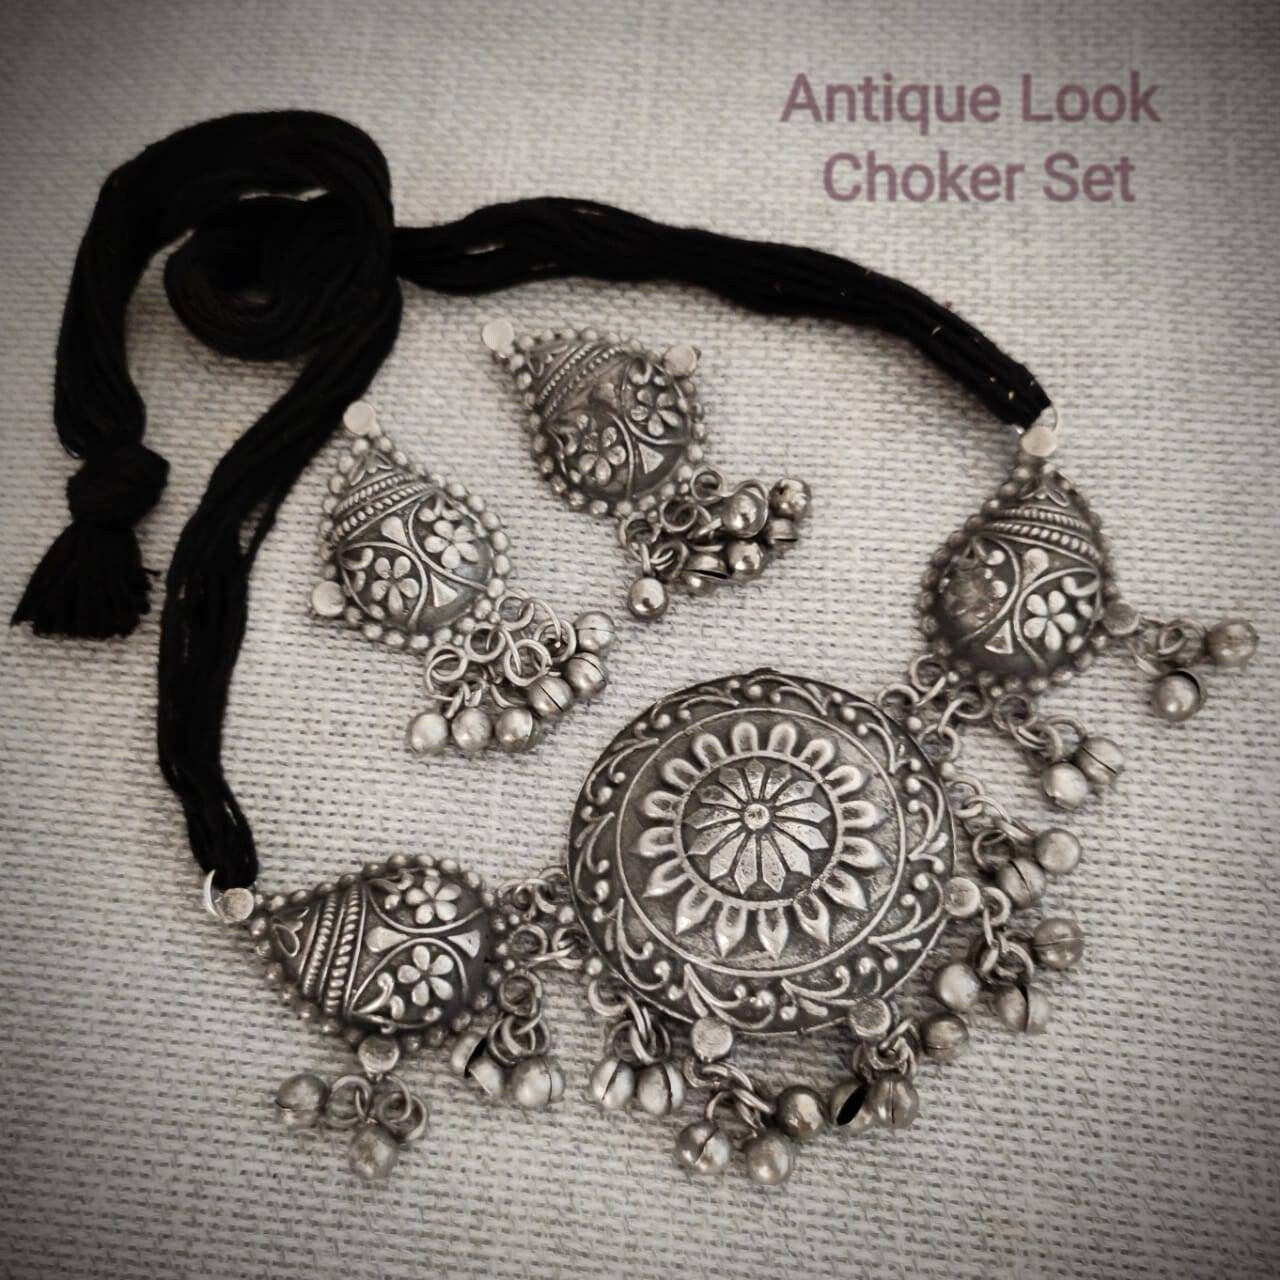 Oxidised German Silver earrings in floral designs Indian Silver look Stone EarringsItem DescriptionOccasion = Wedding, Party Wear, Bridal, Perfect For Indian WeddingsOur Indian Earrings Is Oxidised Jewellery, Created With Careful Attention To Detail. These Earring Are Made From Solid German SIlver Which Gives It An Elegant Look And Feel. This Includes Matching Earring. This Floral Design Is Perfect For Parties And Functions As These Earring Are Specially Designed For Indian Beautiful Brides.All